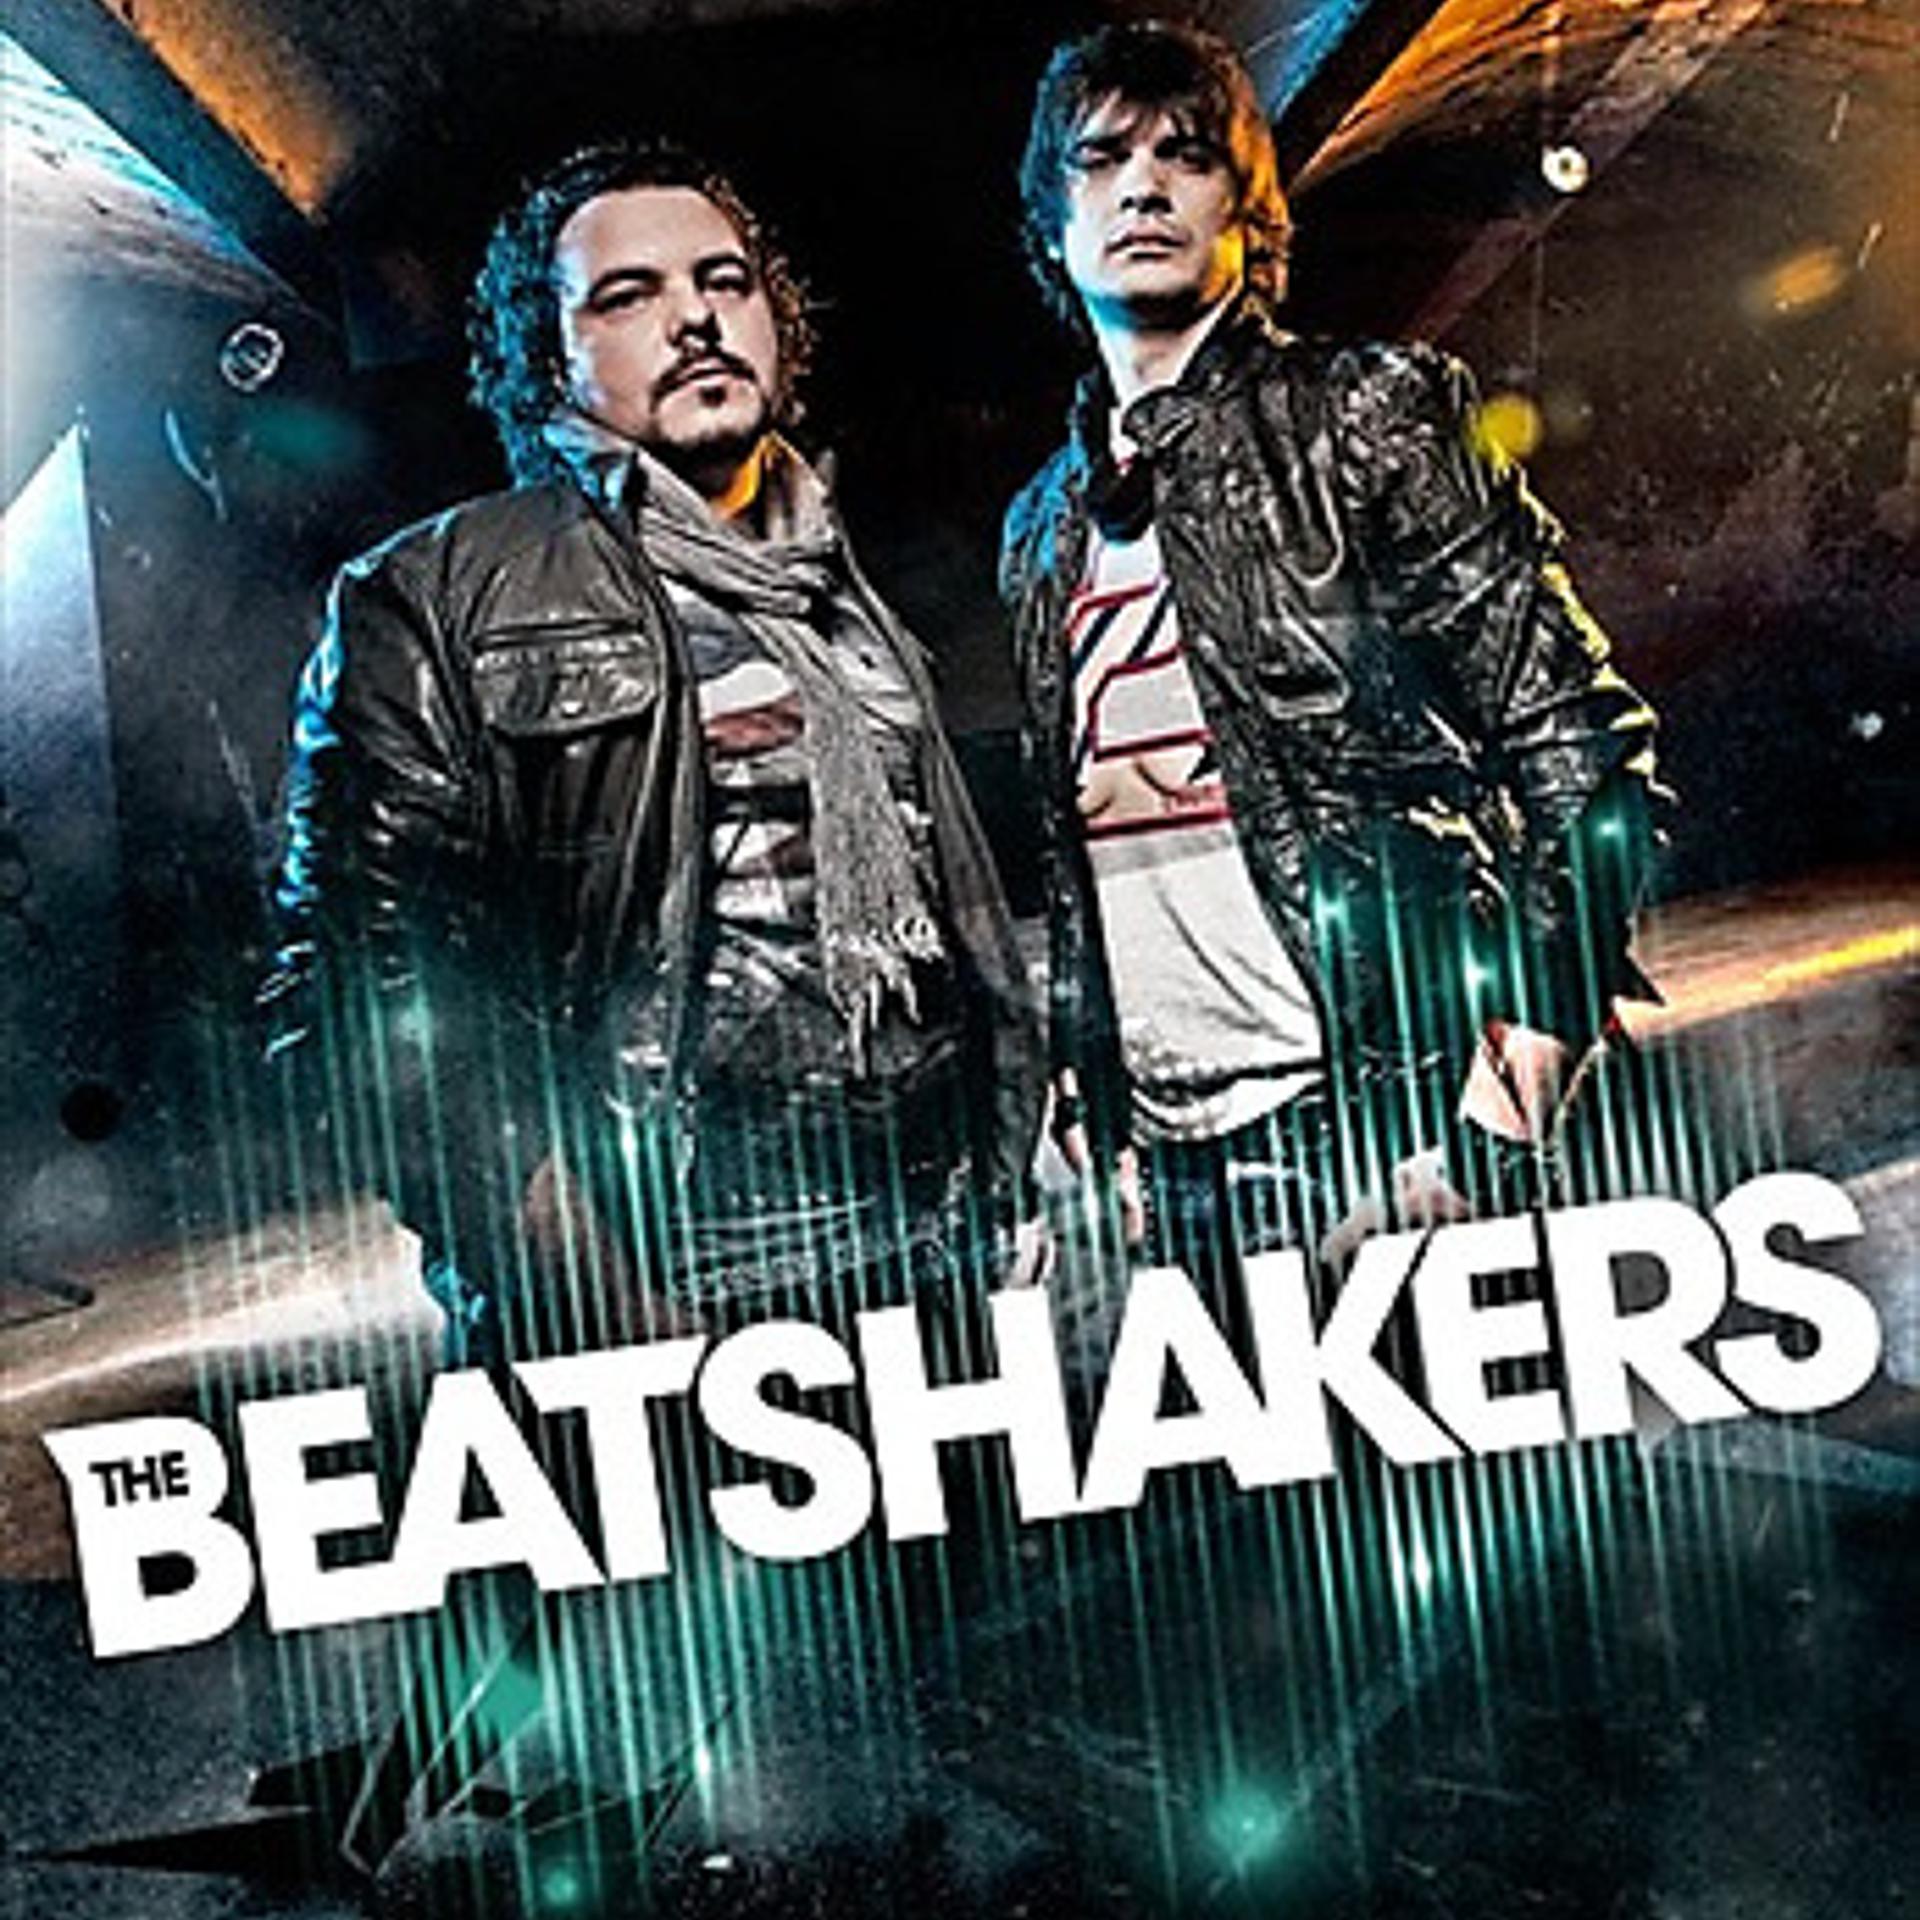 The Beat Shakers - фото